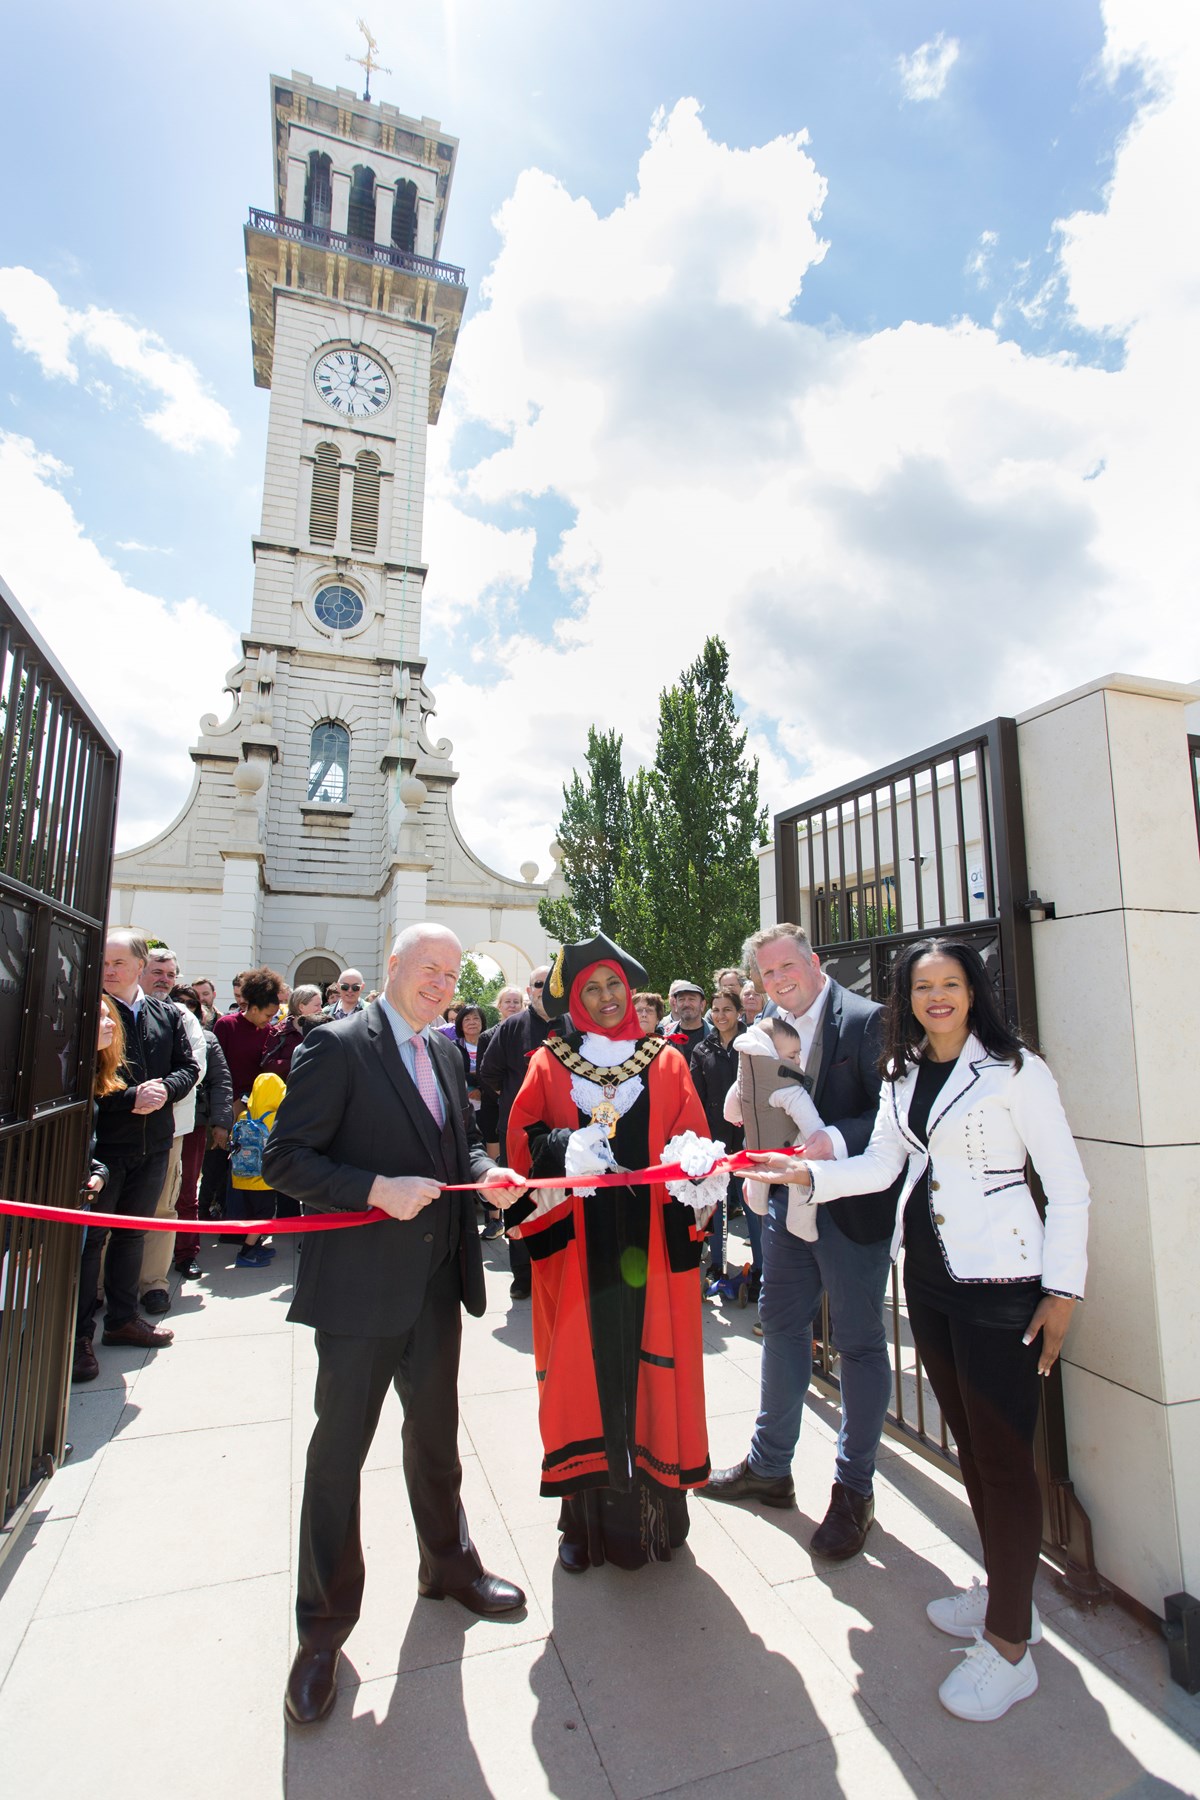 The grand opening of the Caledonian Clock Tower on June 8, 2019, with (L-R) Cllr Paul Smith; The Mayor of Islington, Cllr Rakhia Ismail; Cllr Diarmaid Ward and Cllr Claudia Webbe, executive member for environment and transport